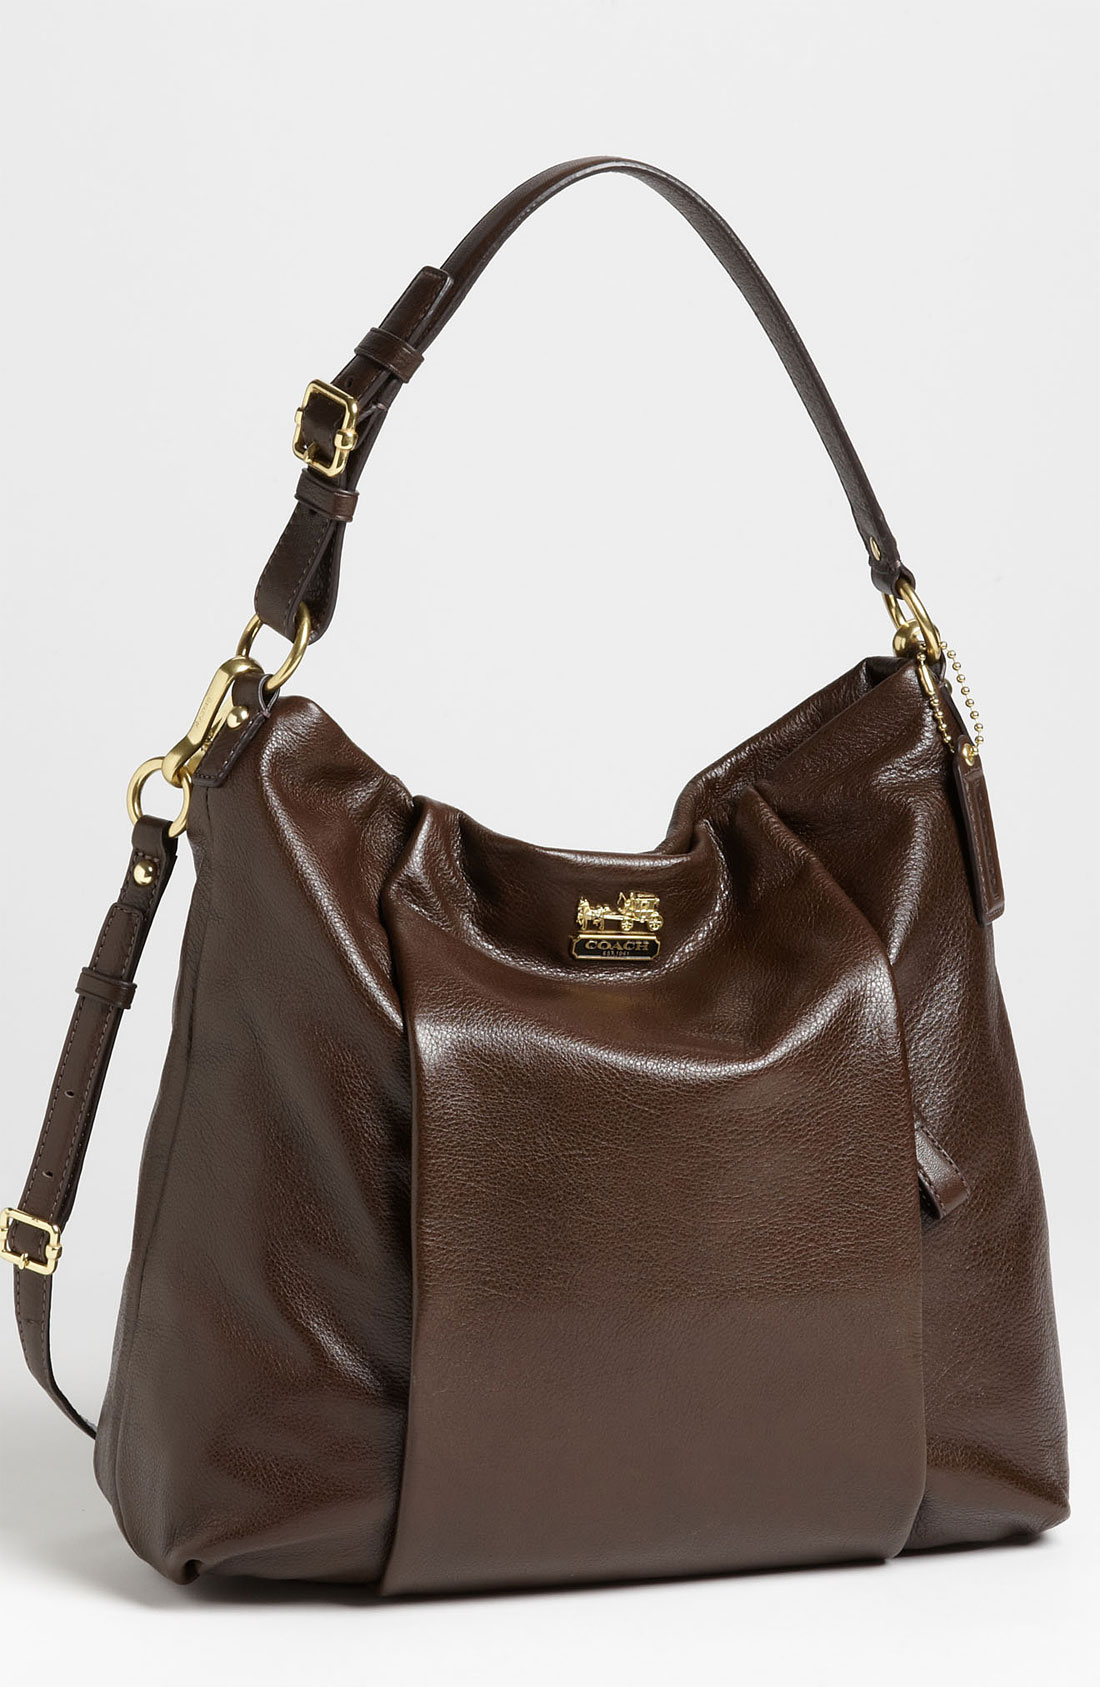 Coach New Madison Isabelle Leather Shoulder Bag in Brown (mahogany) | Lyst